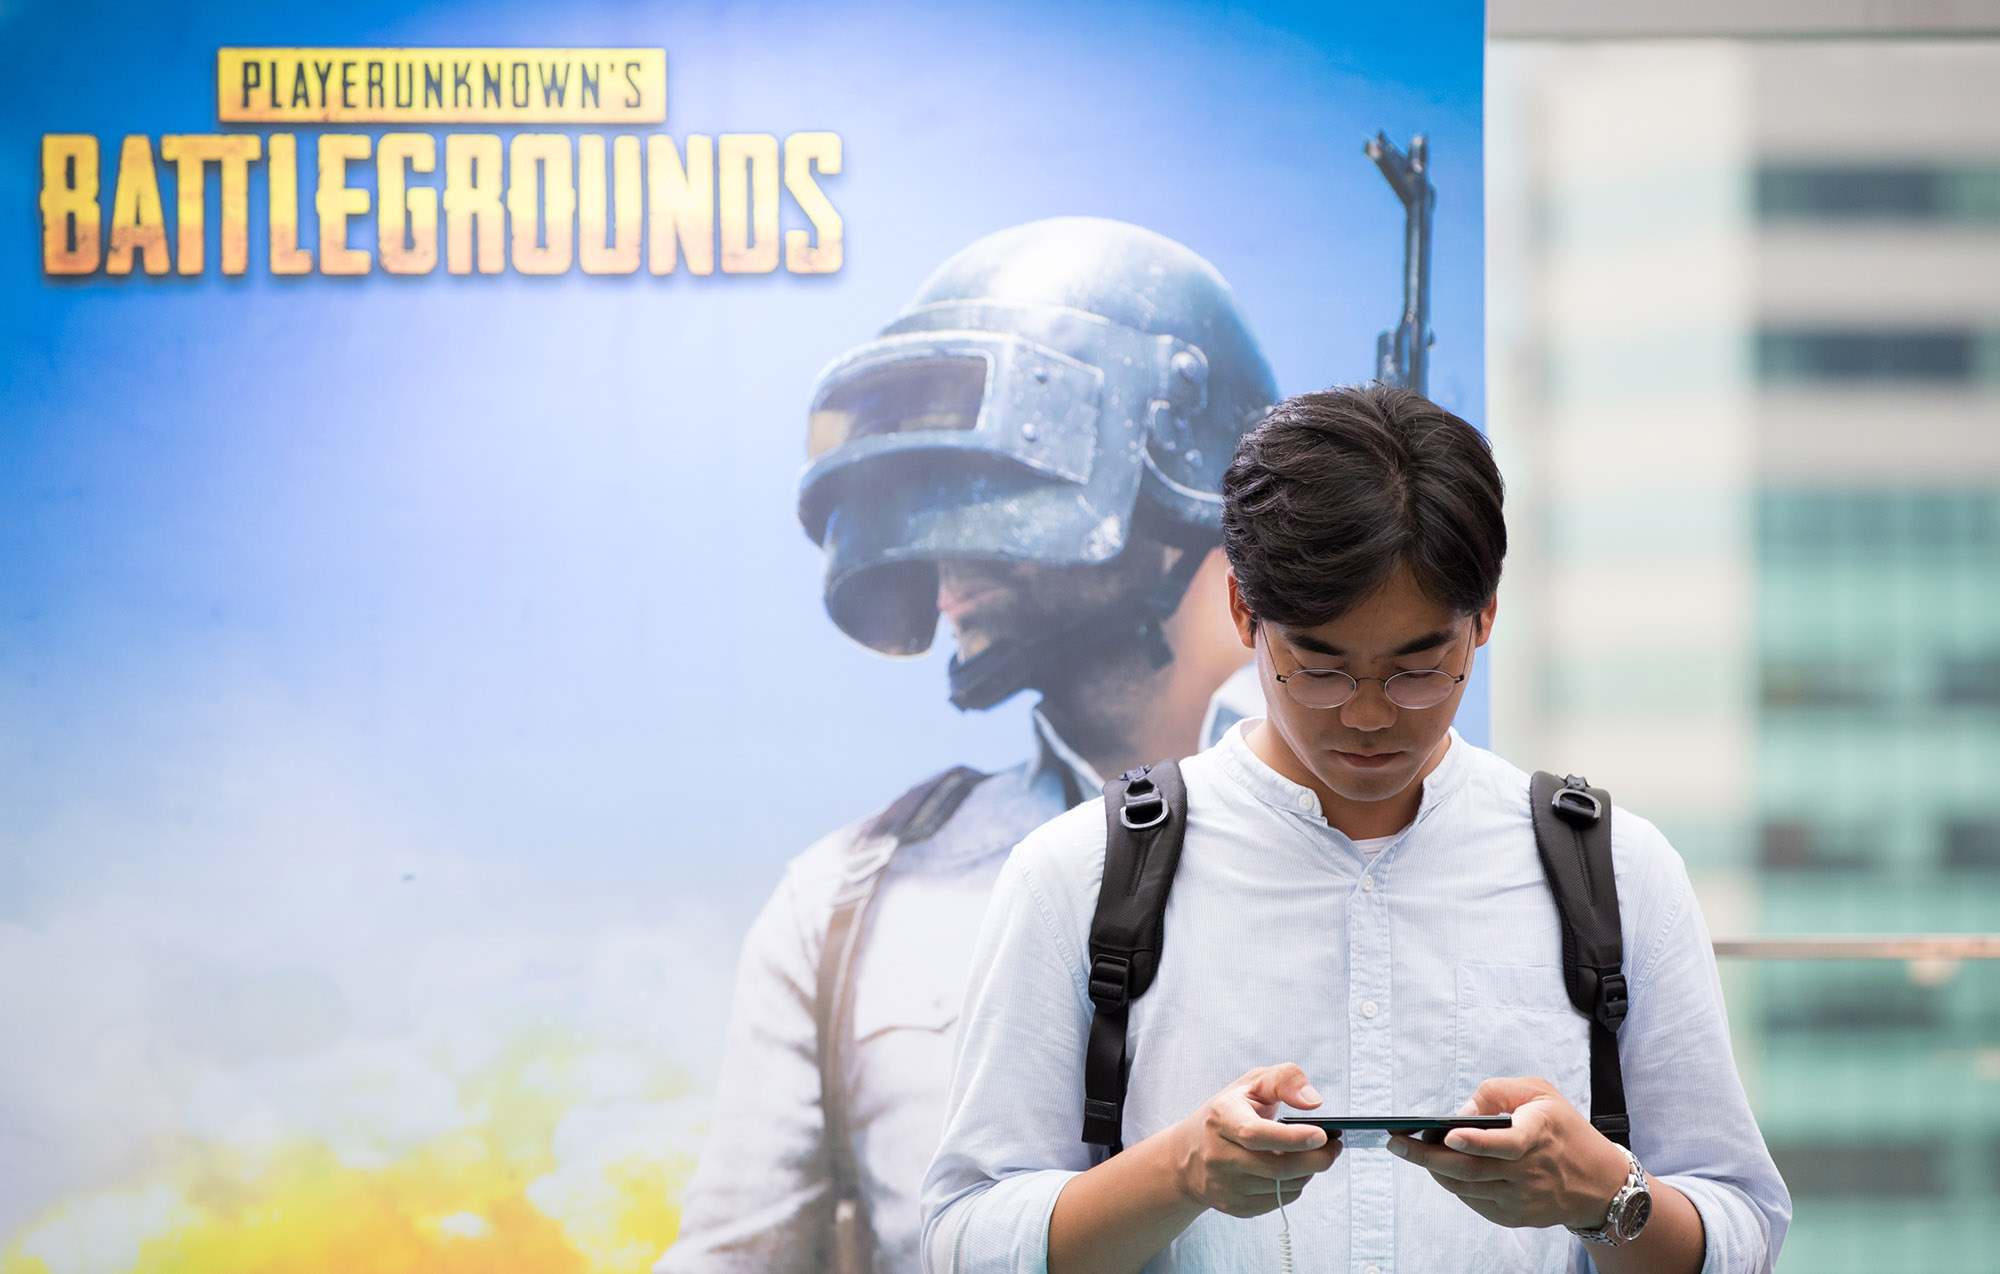 A person uses a smartphone in front of a poster of the PlayerUnknown's Battlegrounds game&nbsp;in Seoul.